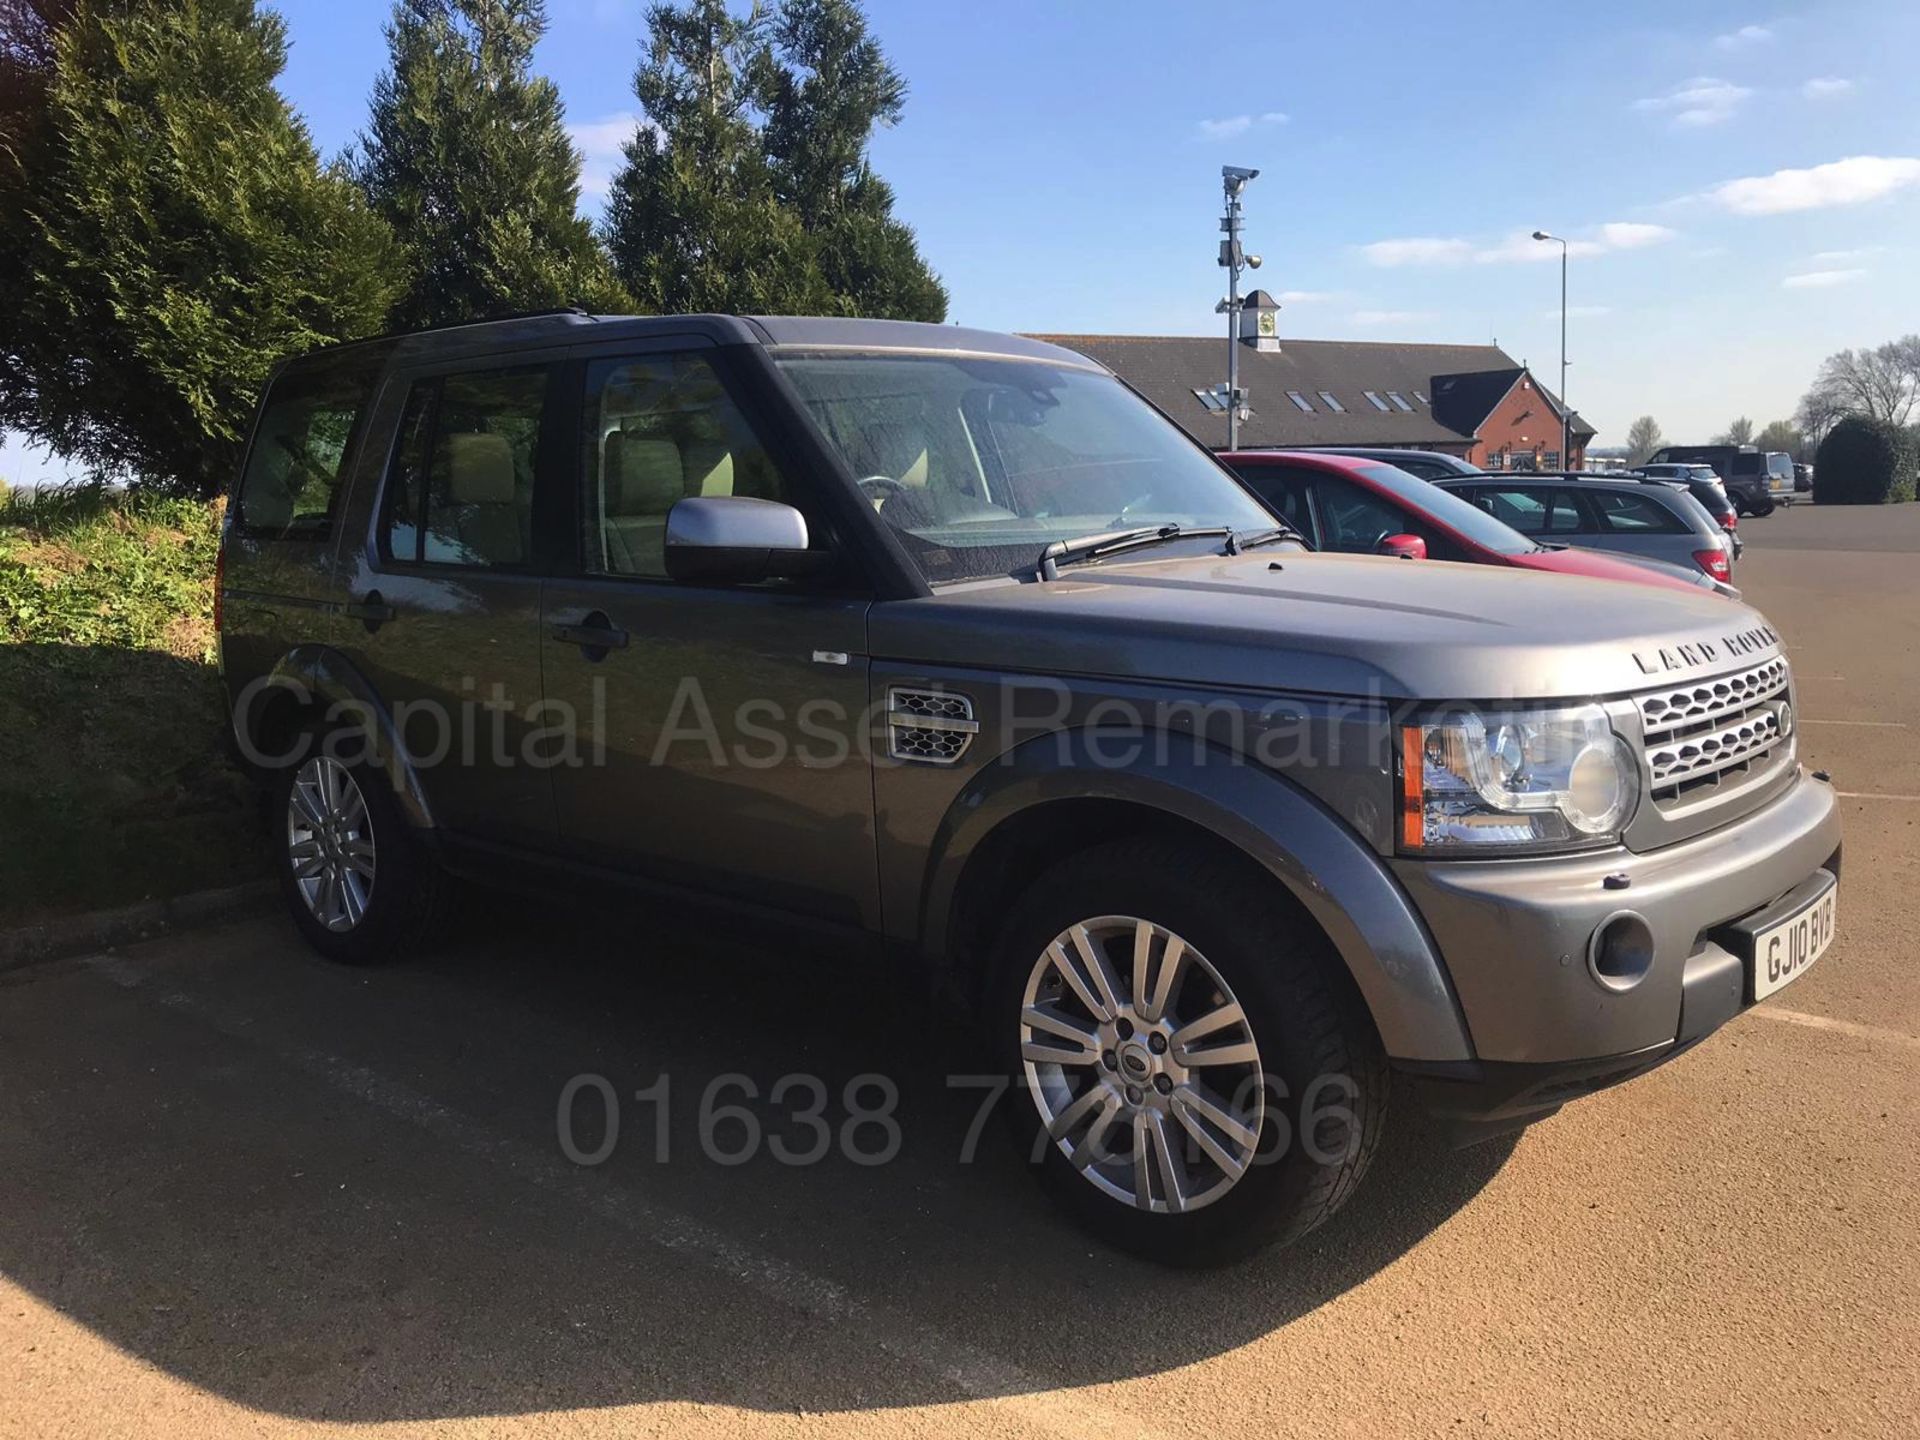 (ON SALE) LAND ROVER DISCOVERY 4 *HSE* SUV (2010) '3.0 TDV6 - 245 BHP - AUTO' *LEATHER - SAT NAV*